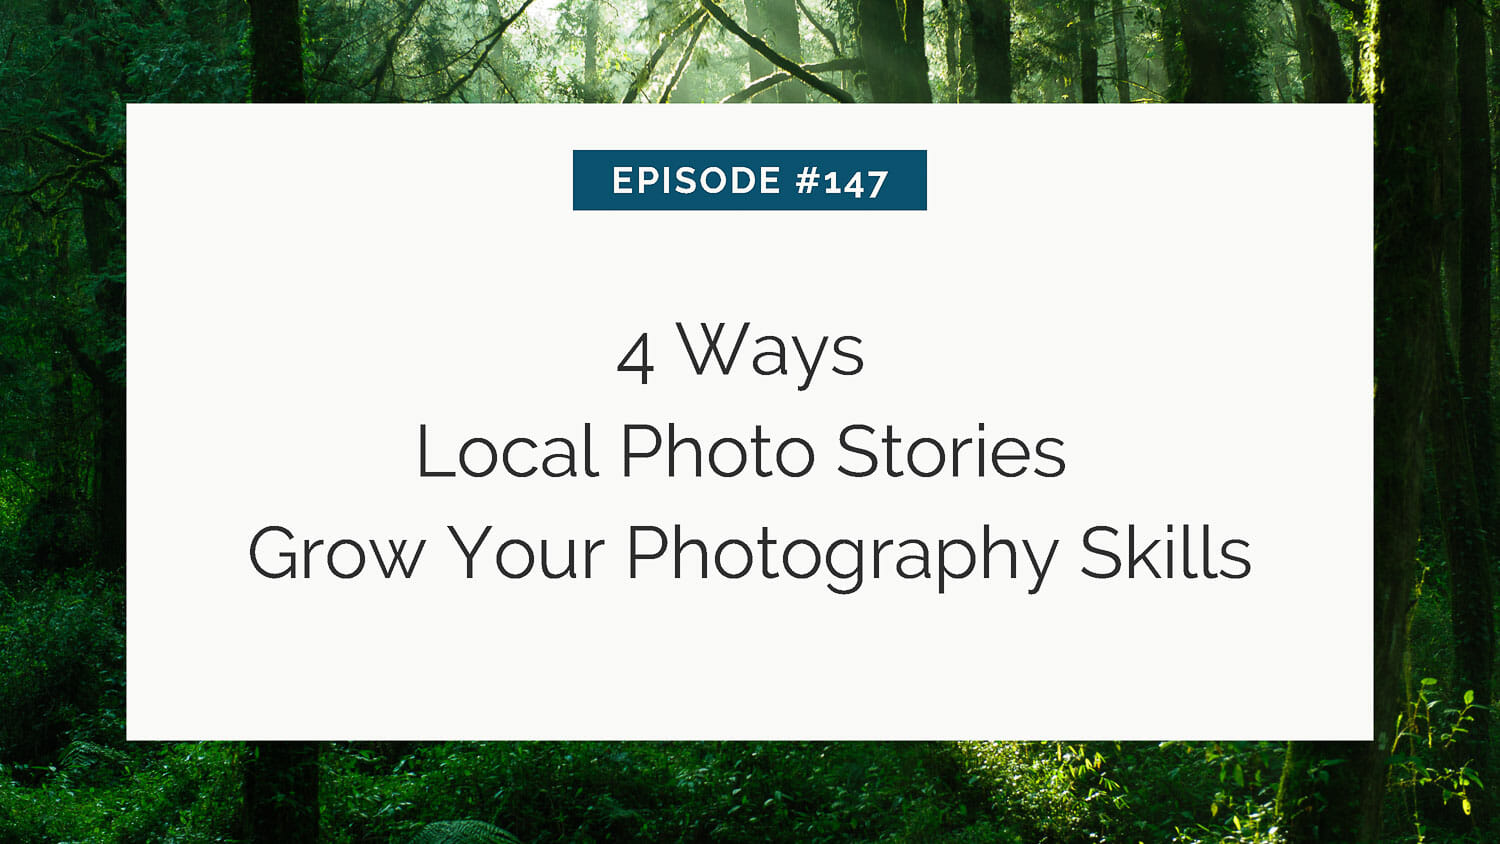 Promotional graphic for episode #147 titled "4 ways local photo stories grow your photography skills" set against a forest backdrop.